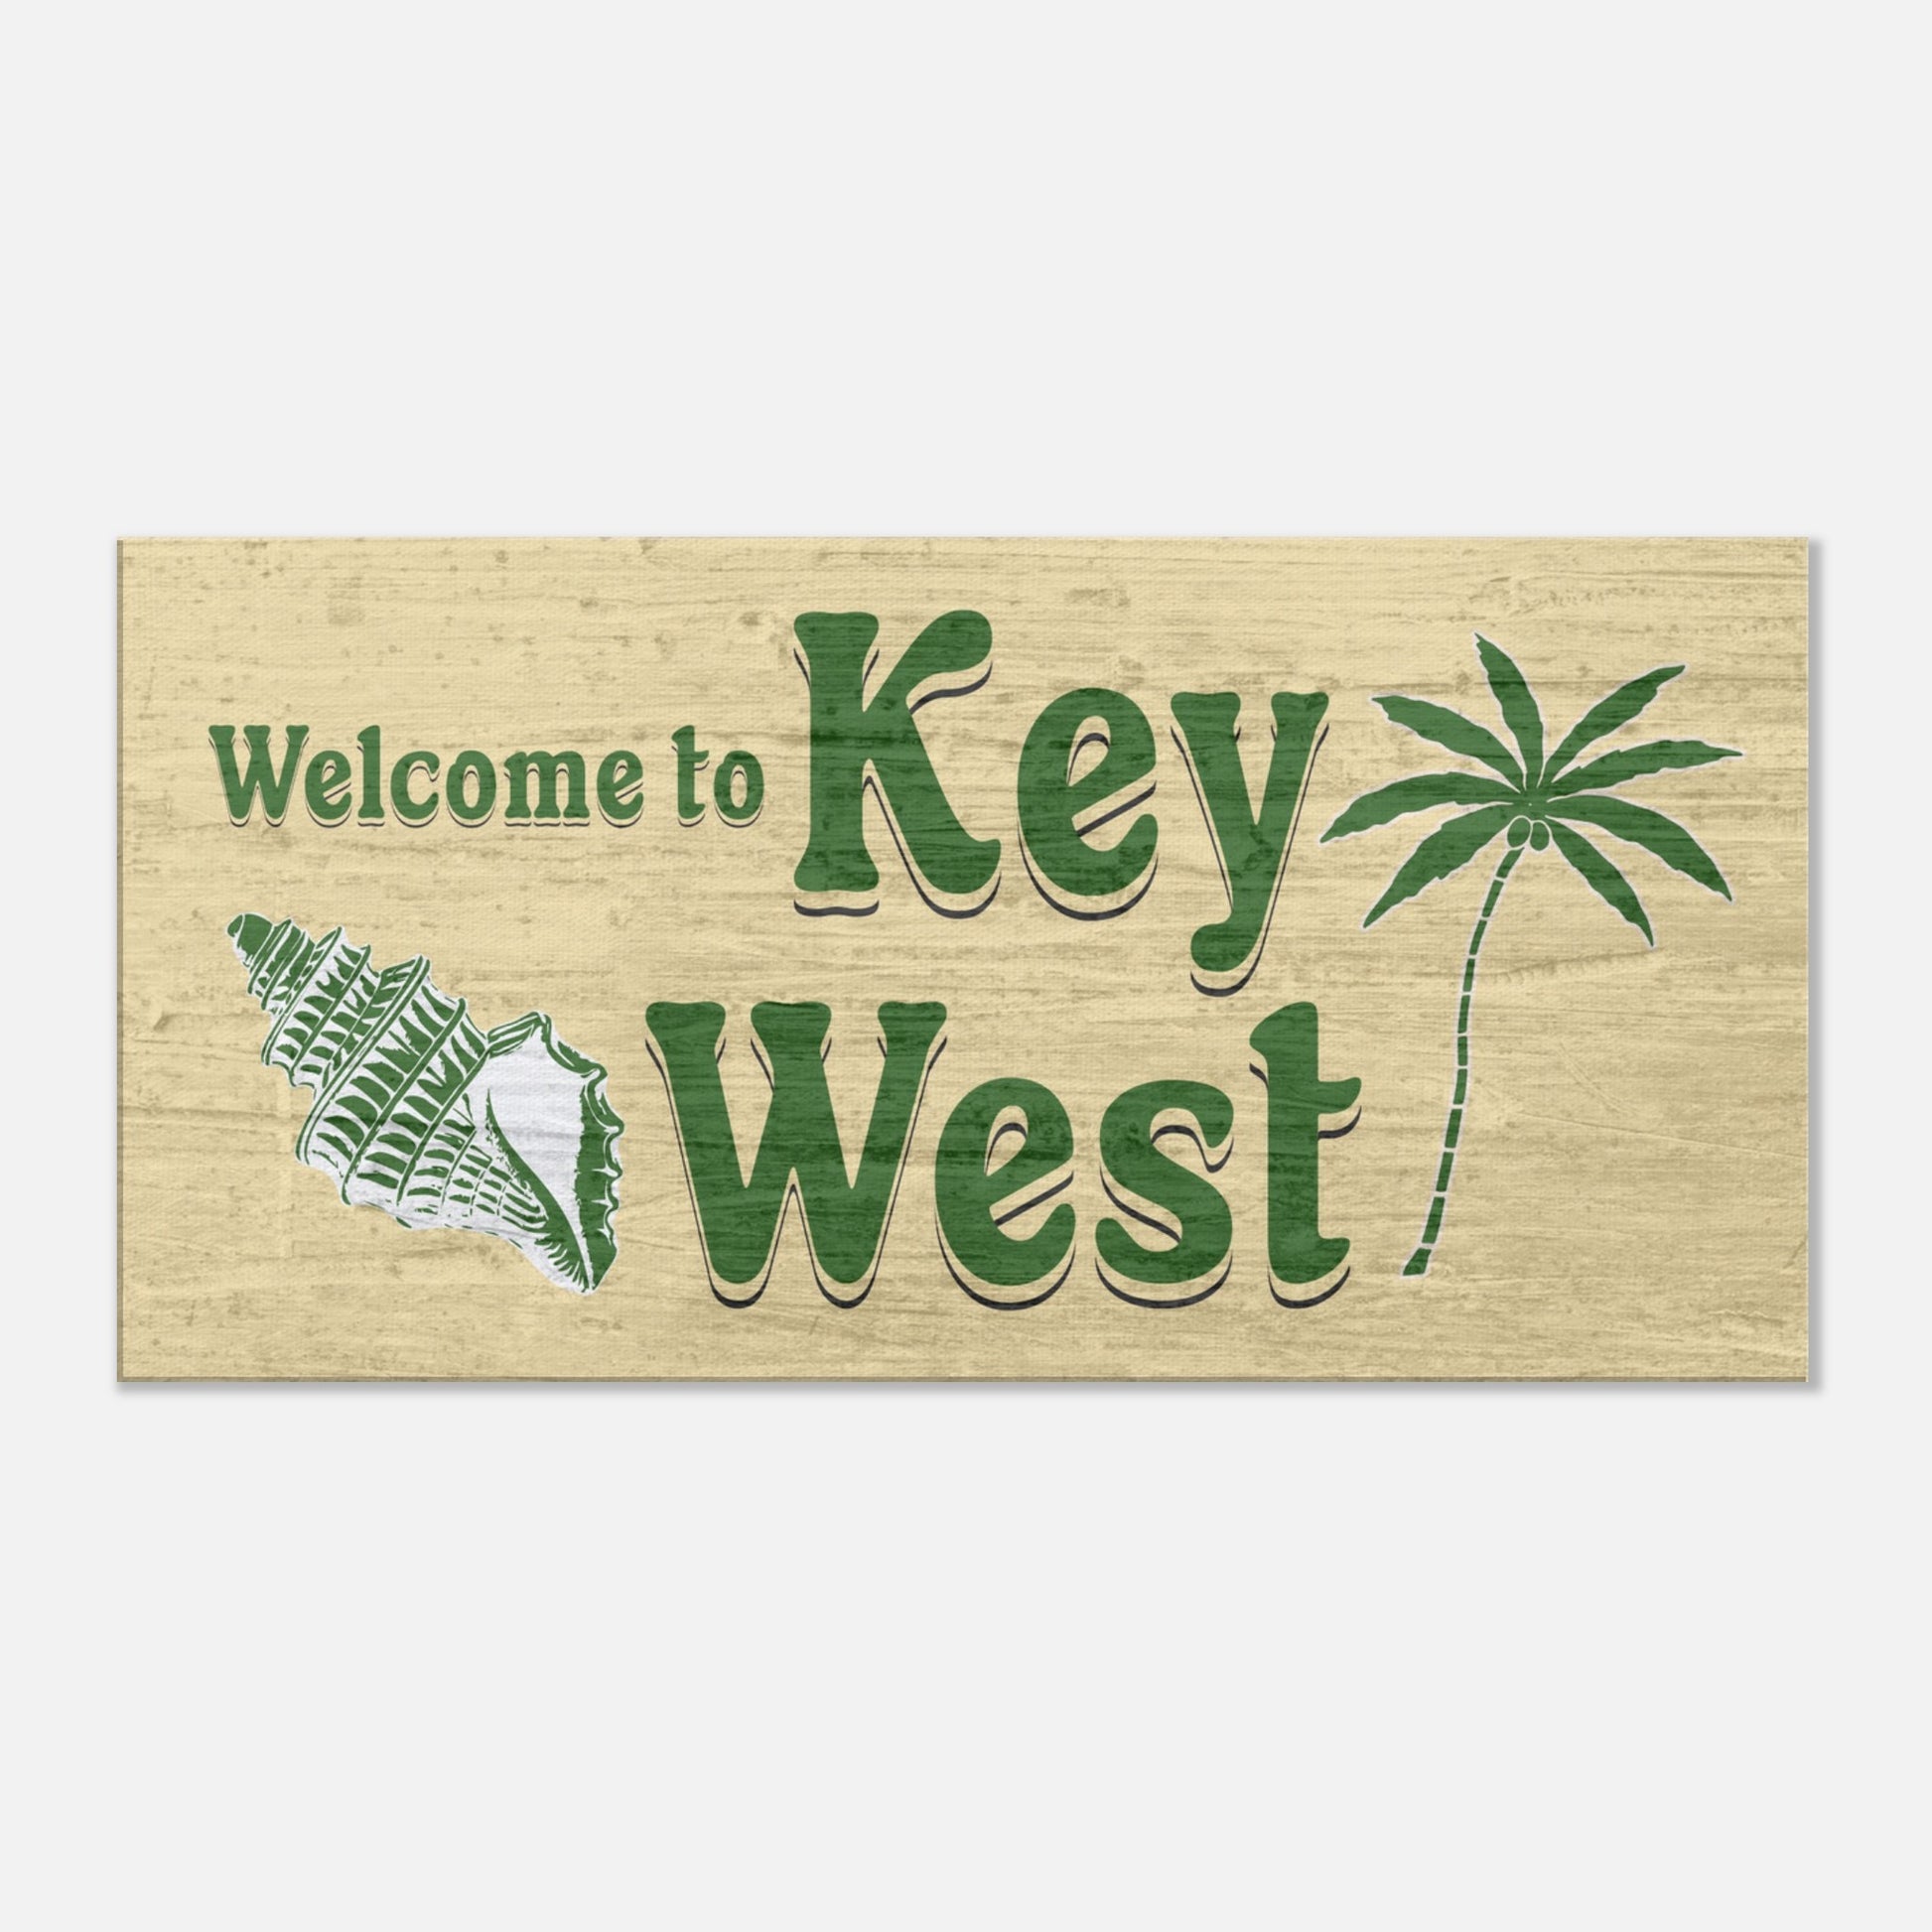 Welcome to Key West Large Canvas Wall Print at Caribbean Rays